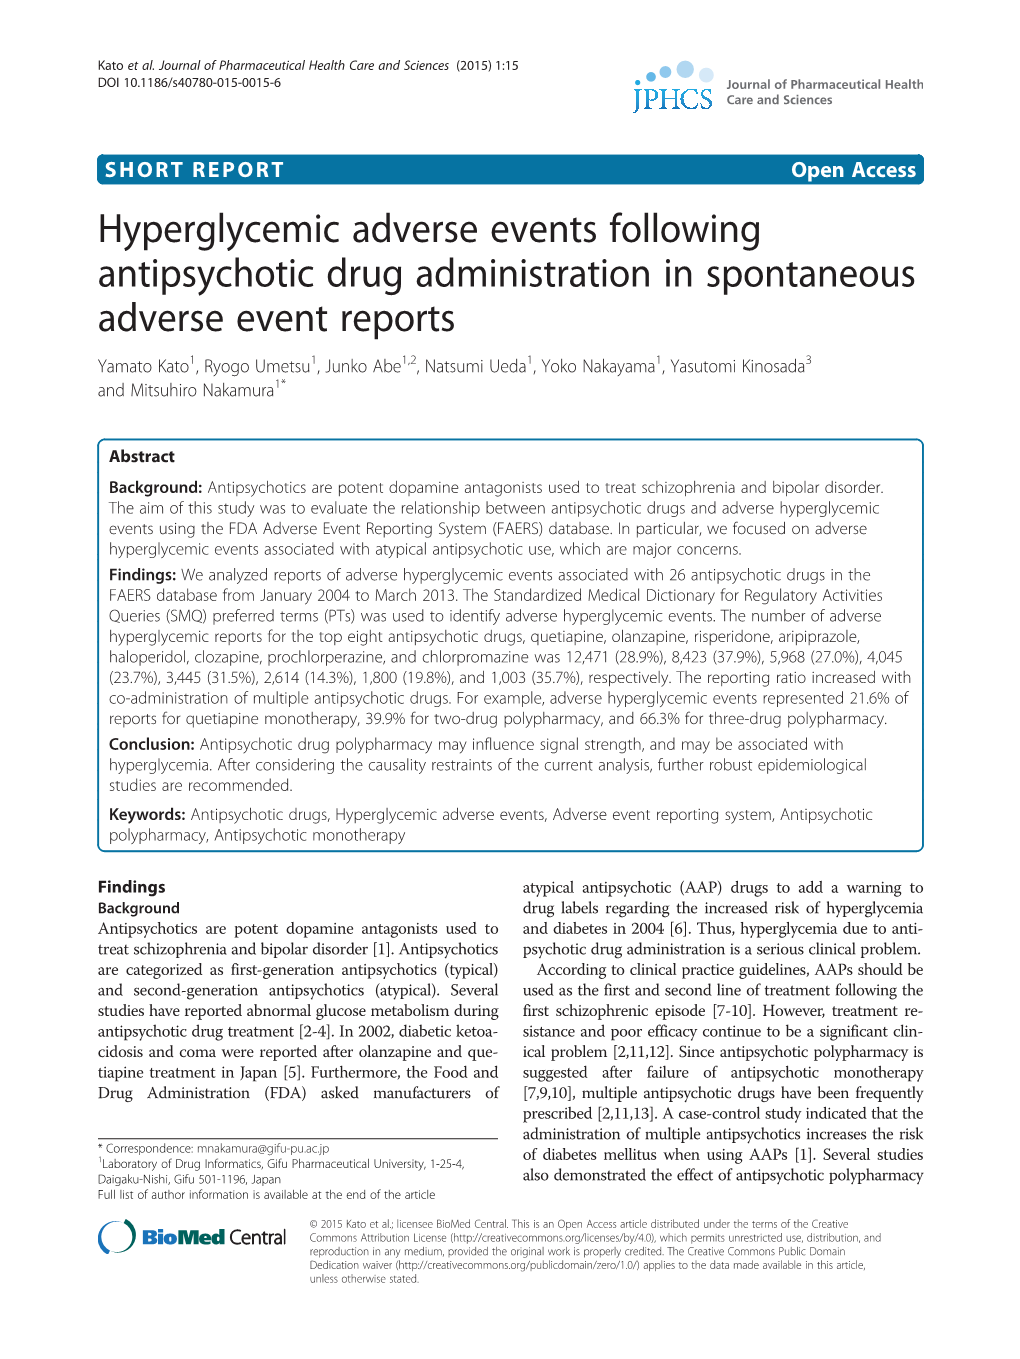 Hyperglycemic Adverse Events Following Antipsychotic Drug